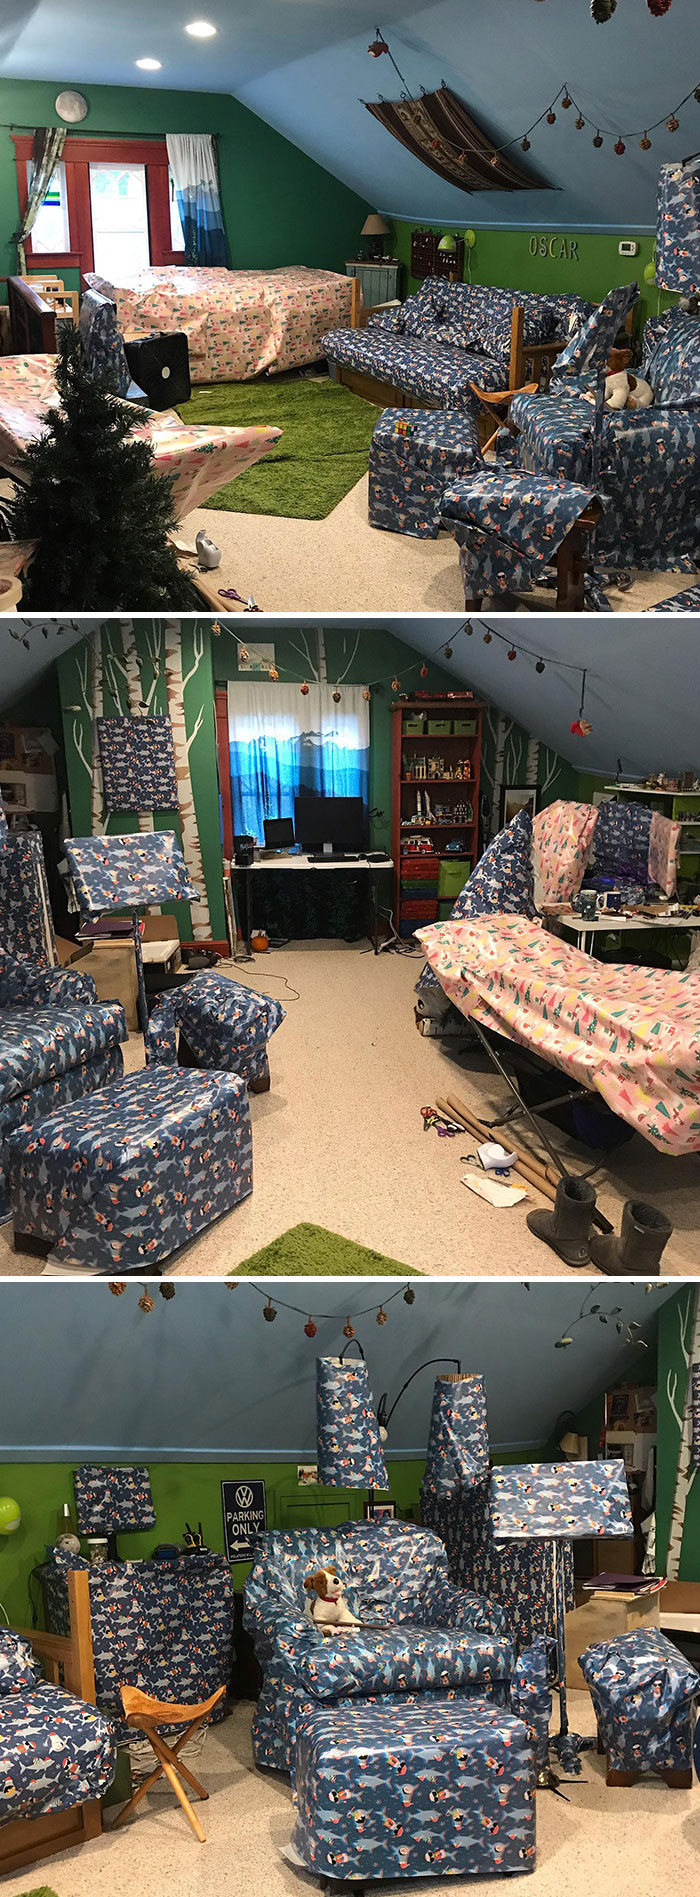 Shenanigans. This Is My Teenager's Room. My Sister And I Wrapped It Up Pretty While He Was On A Walk. Spoiler: He Loved It